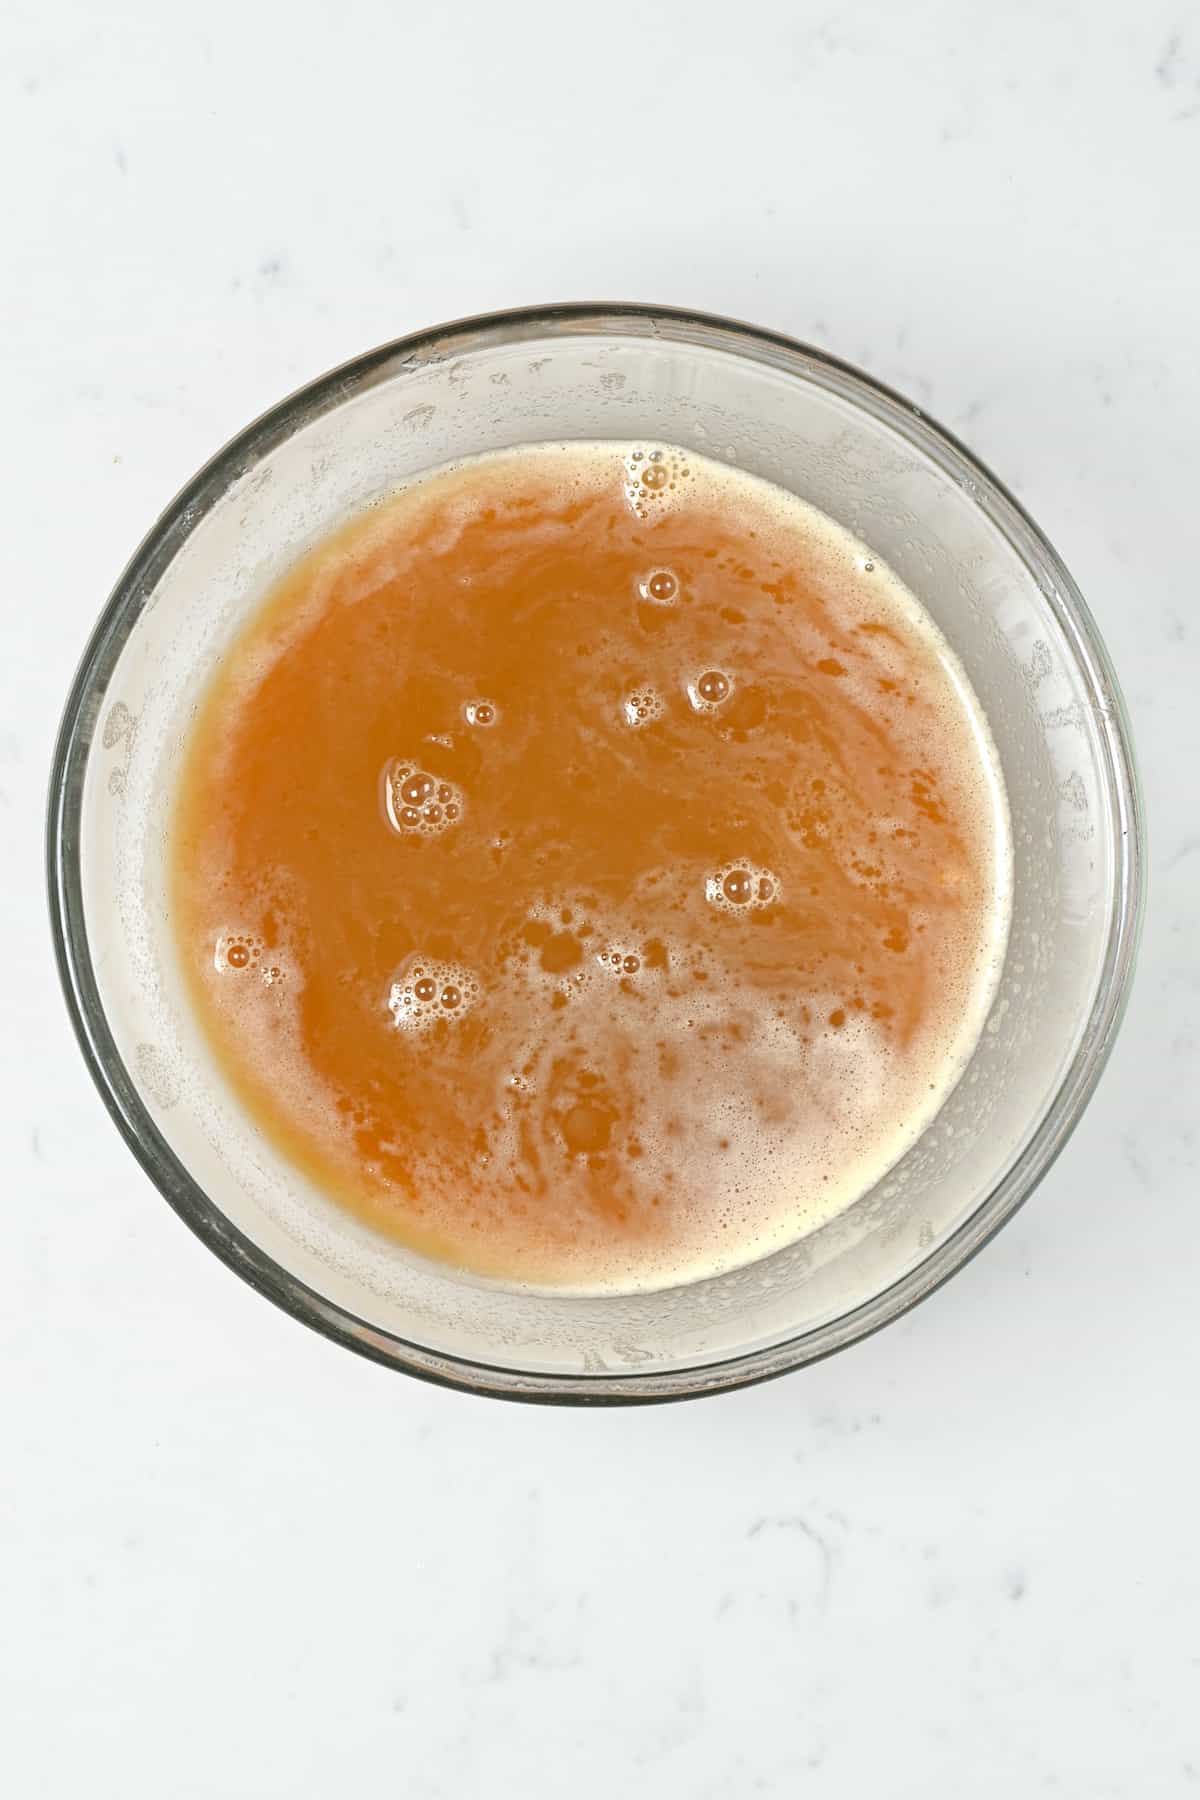 A bowl with apple cider juice